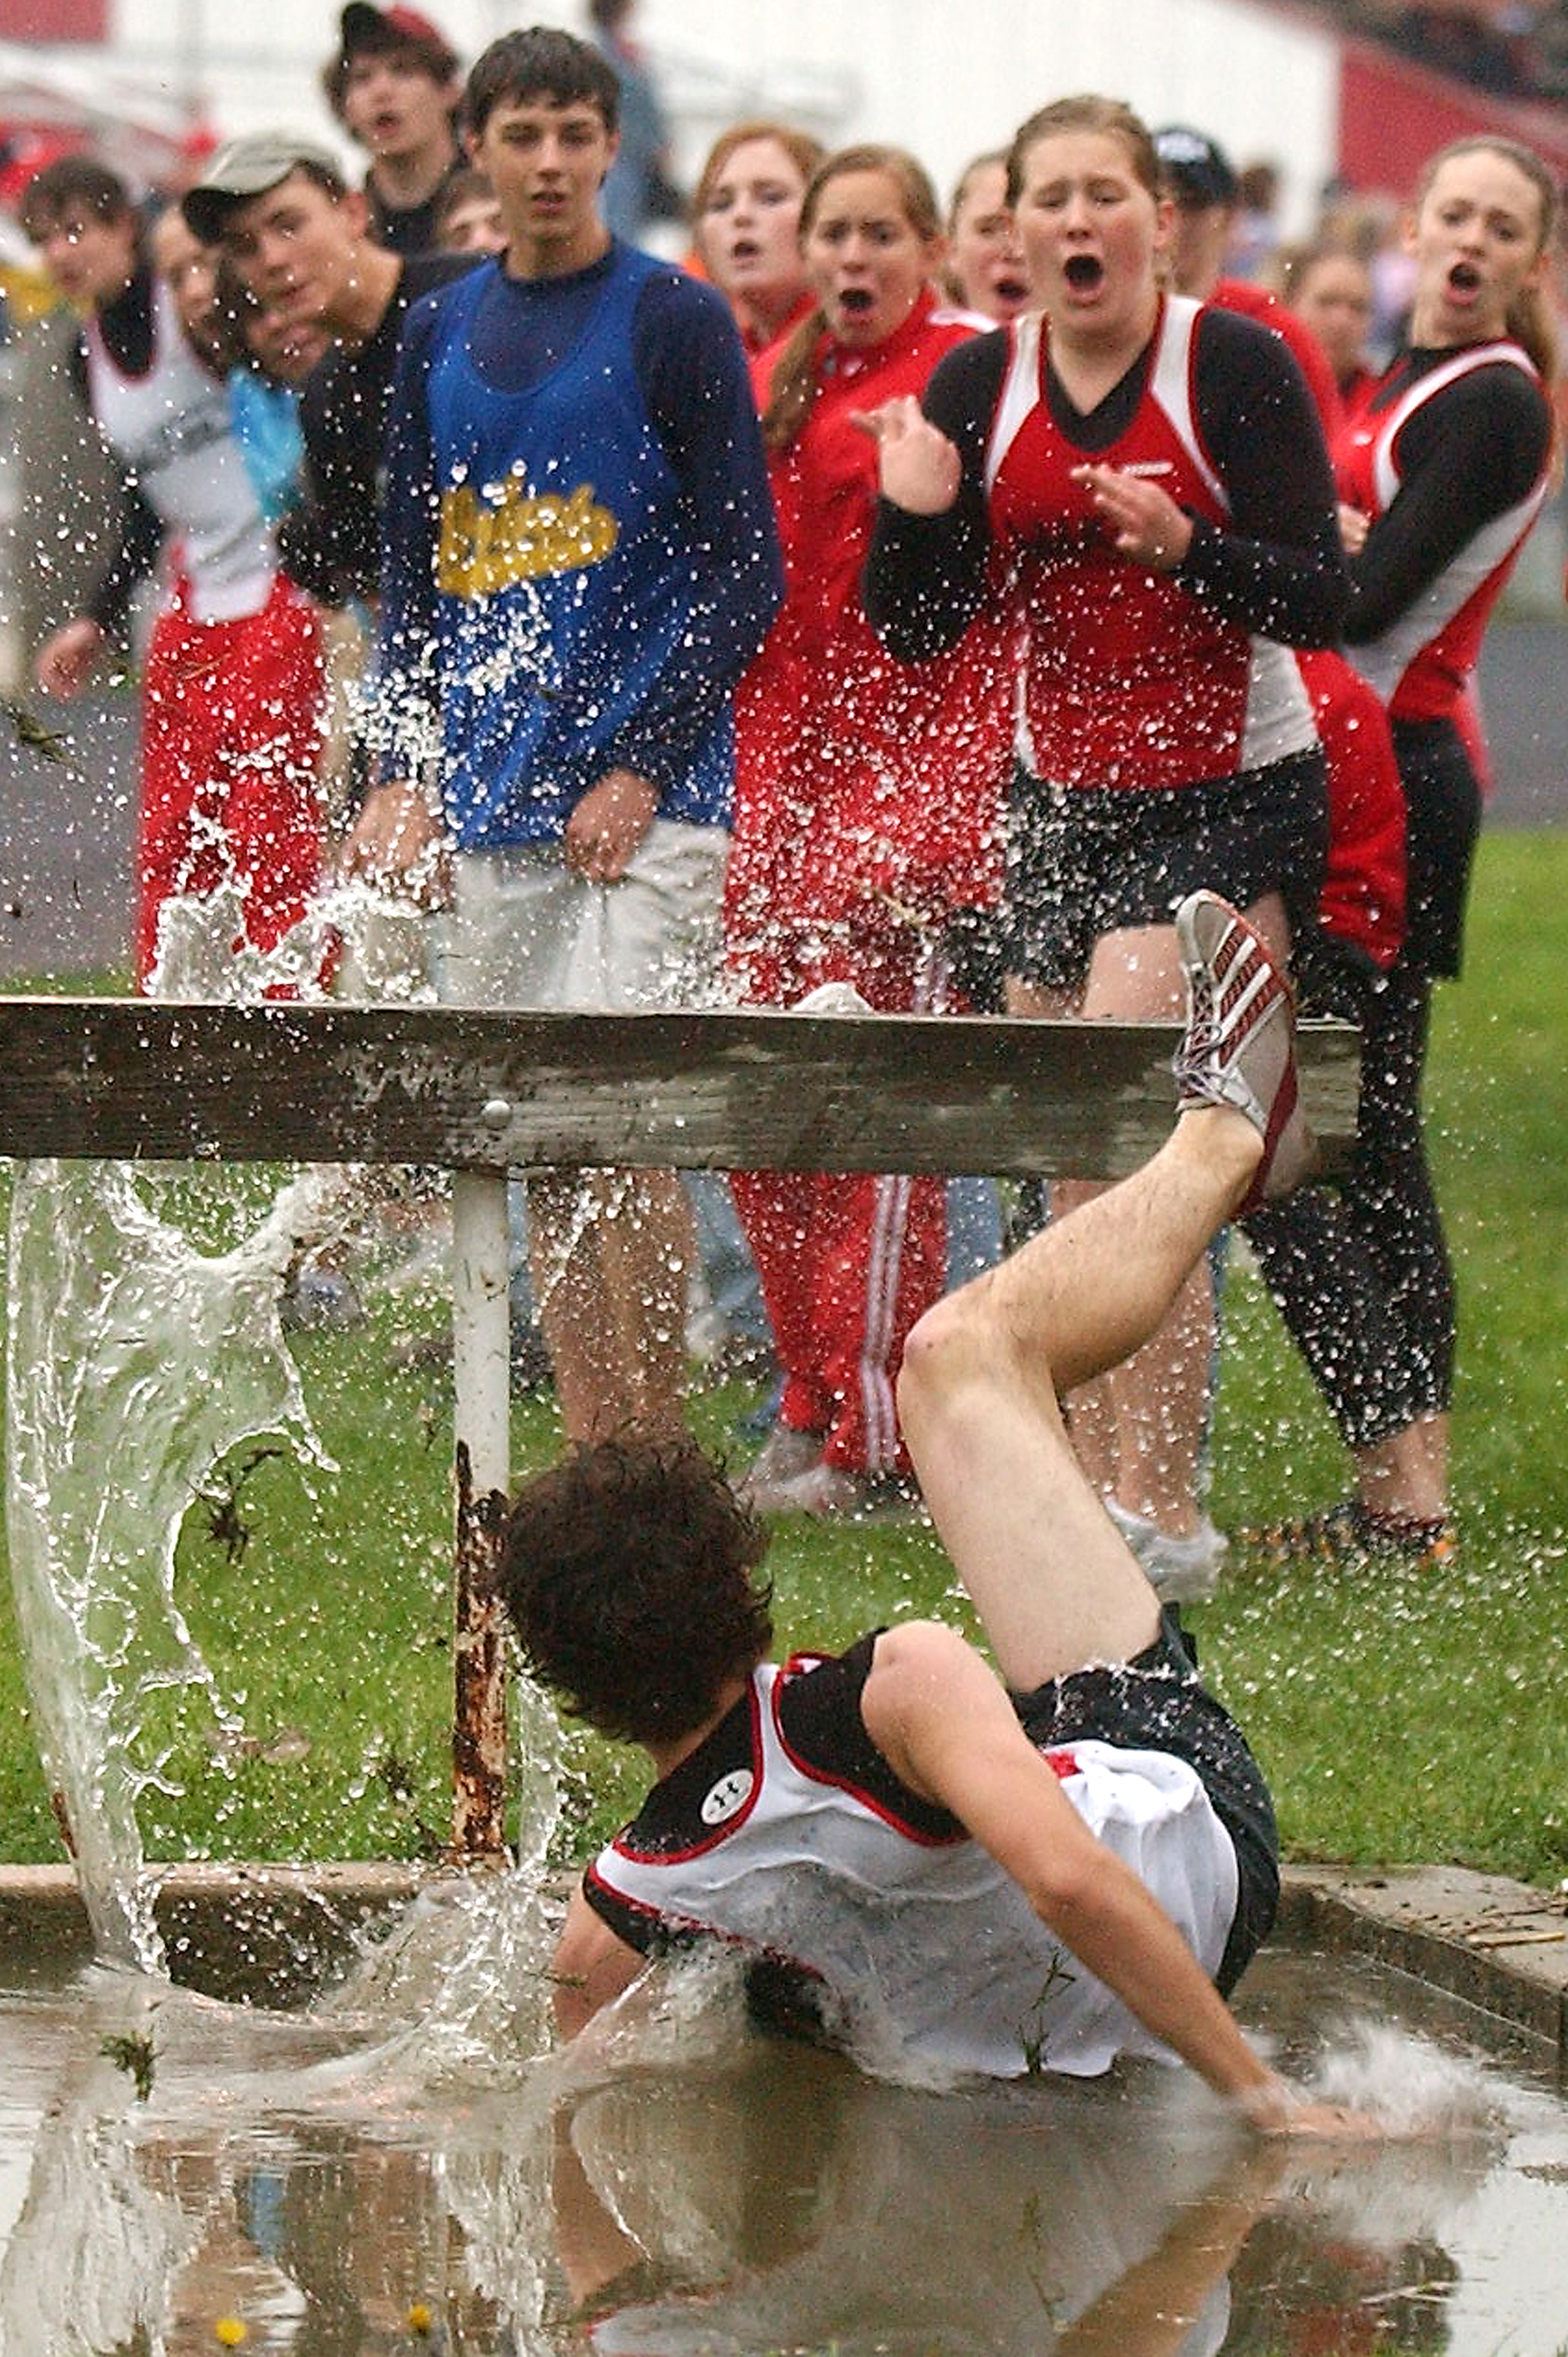  Pittsfield High School students react to their teammate Justin Critchelow's backward fall into the water after catching his foot during the boys steeplechase at the Saukee Olympics track meet.  Despite the fall, Critchelow maintained his lead and wo